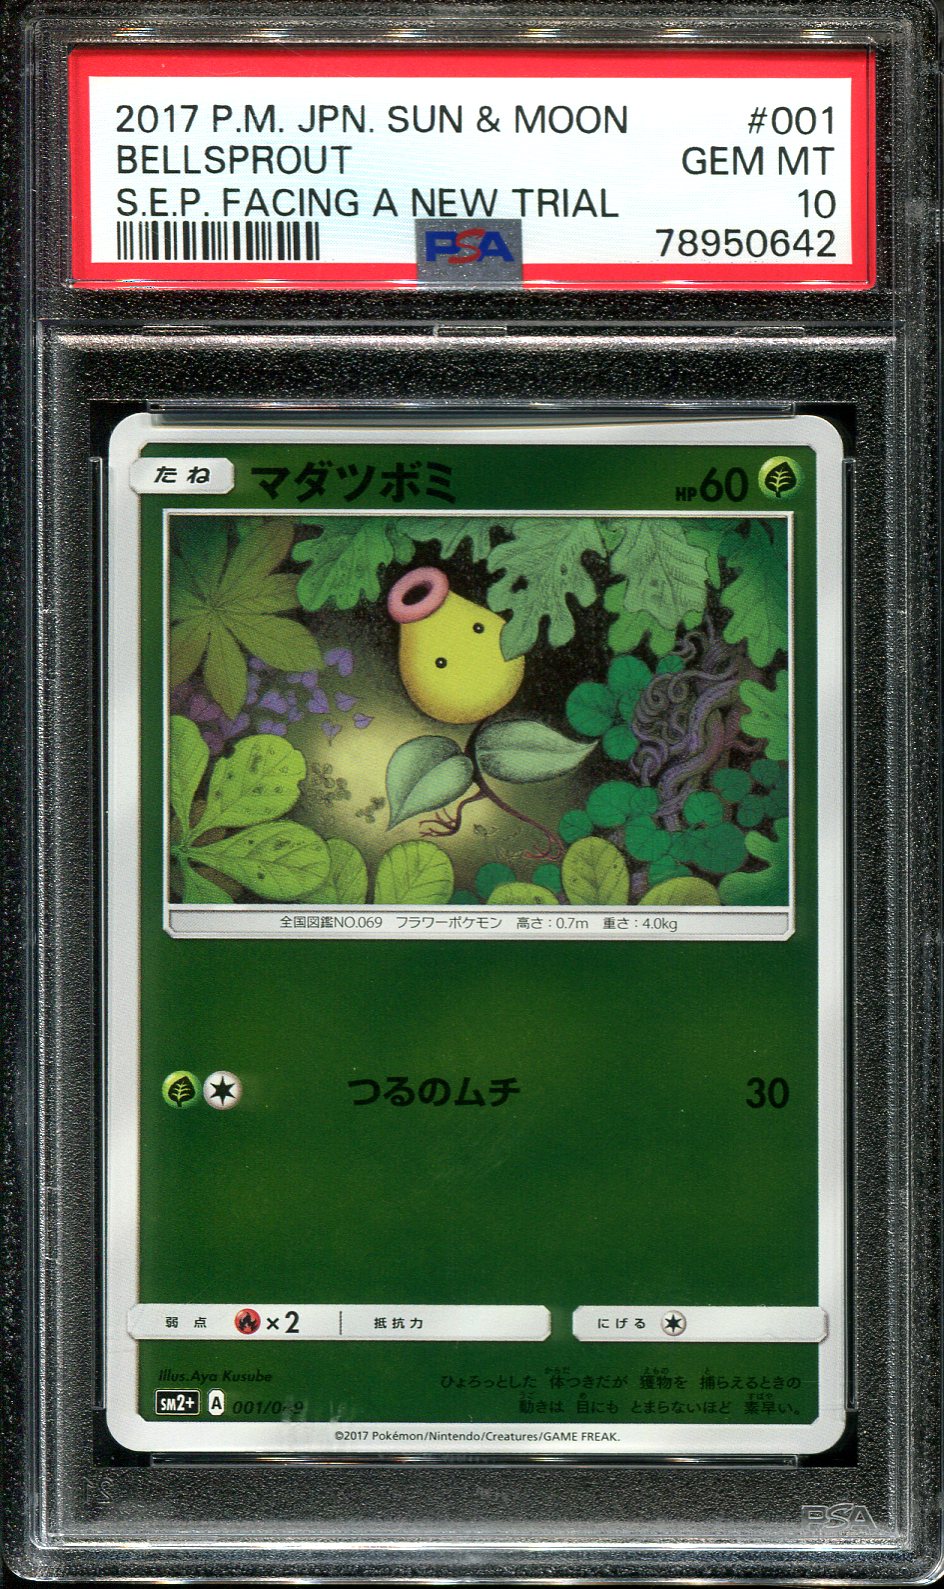 BELLSPROUT 001/049 PSA 10 POKEMON FACING A NEW TRIAL JAPANESE REVERSE HOLO